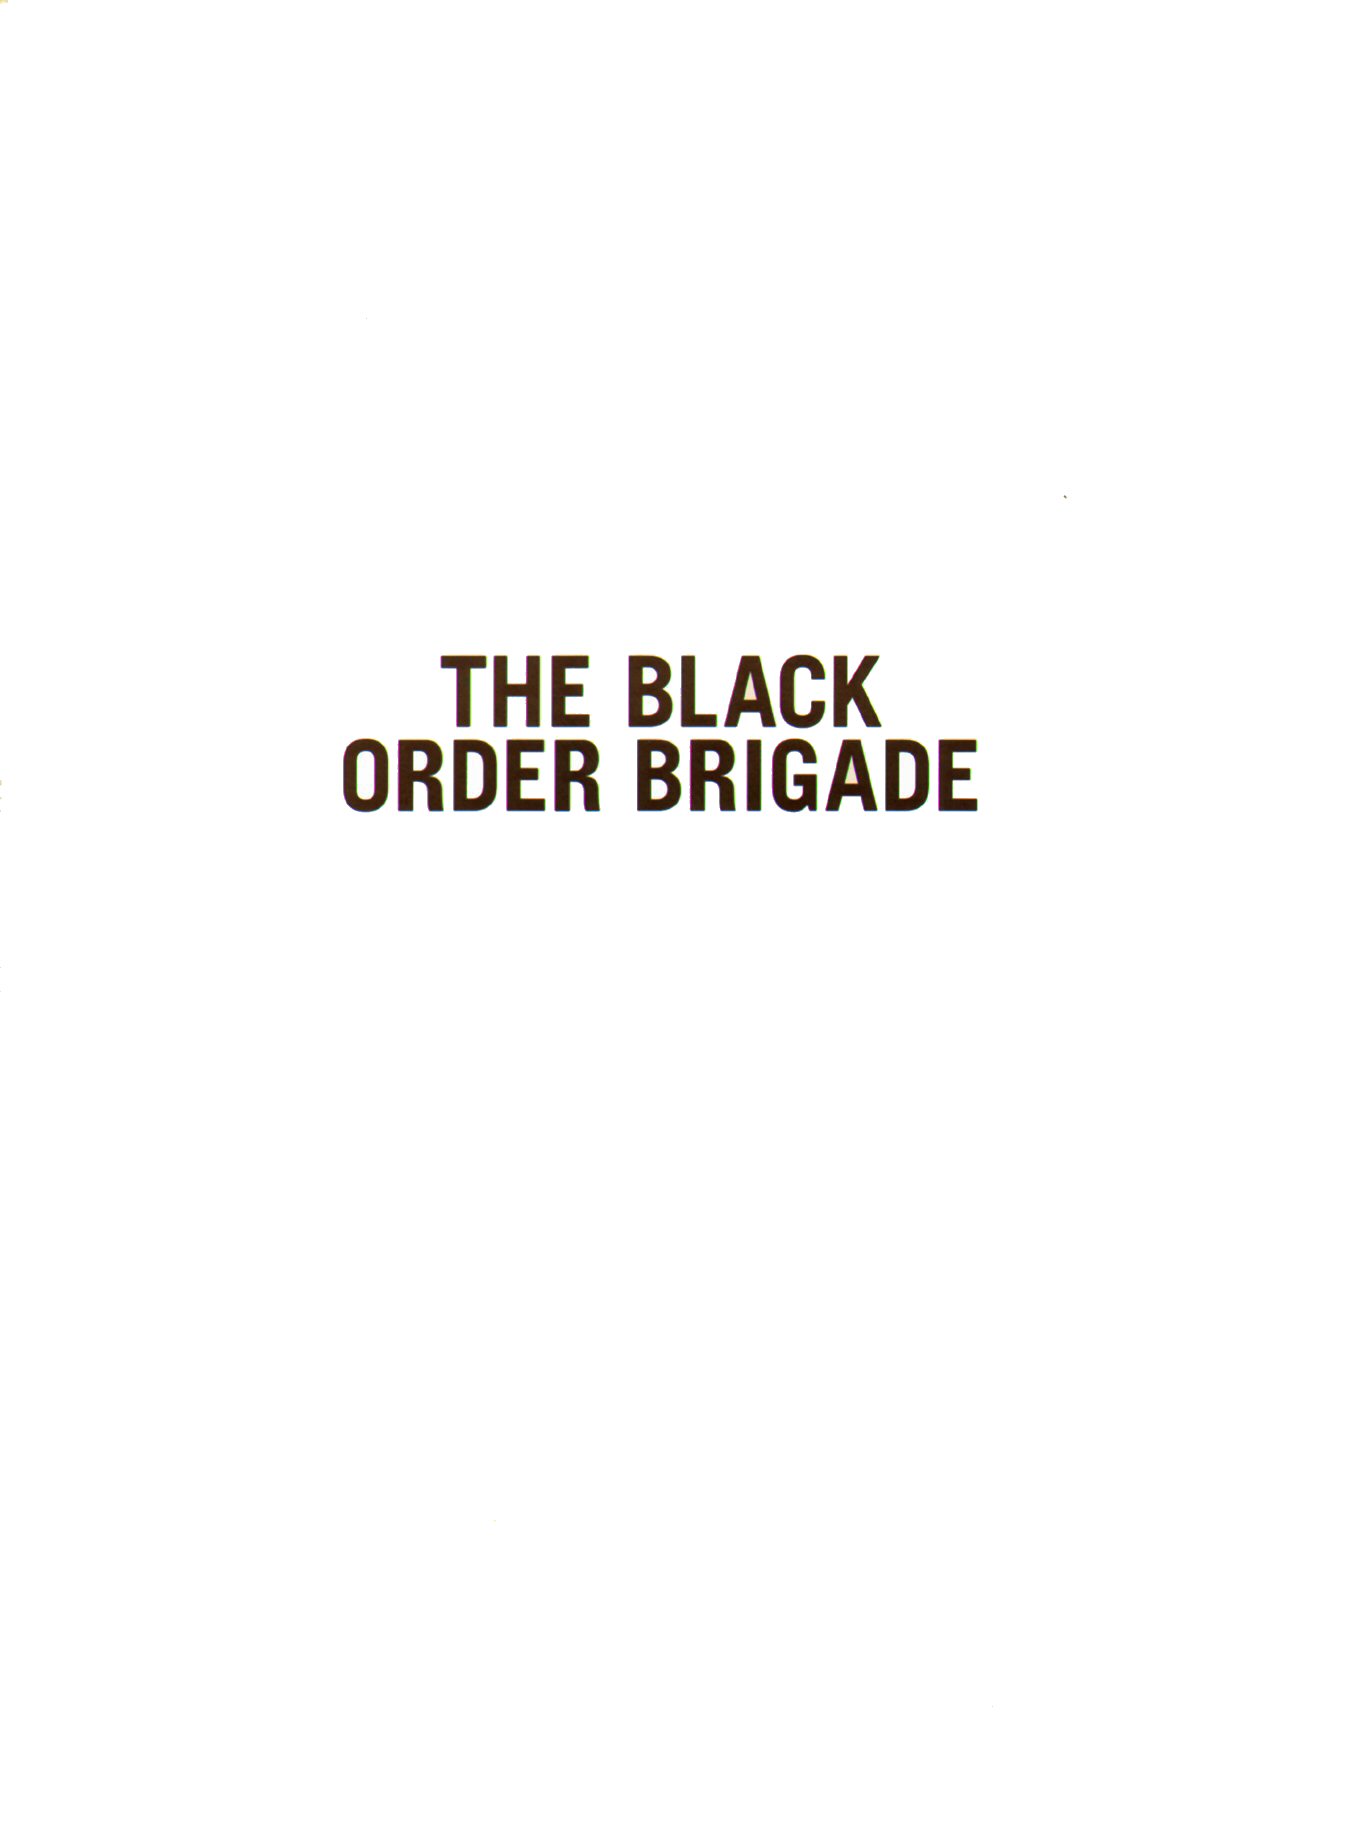 Read online The Black Order Brigade comic -  Issue # TPB - 3